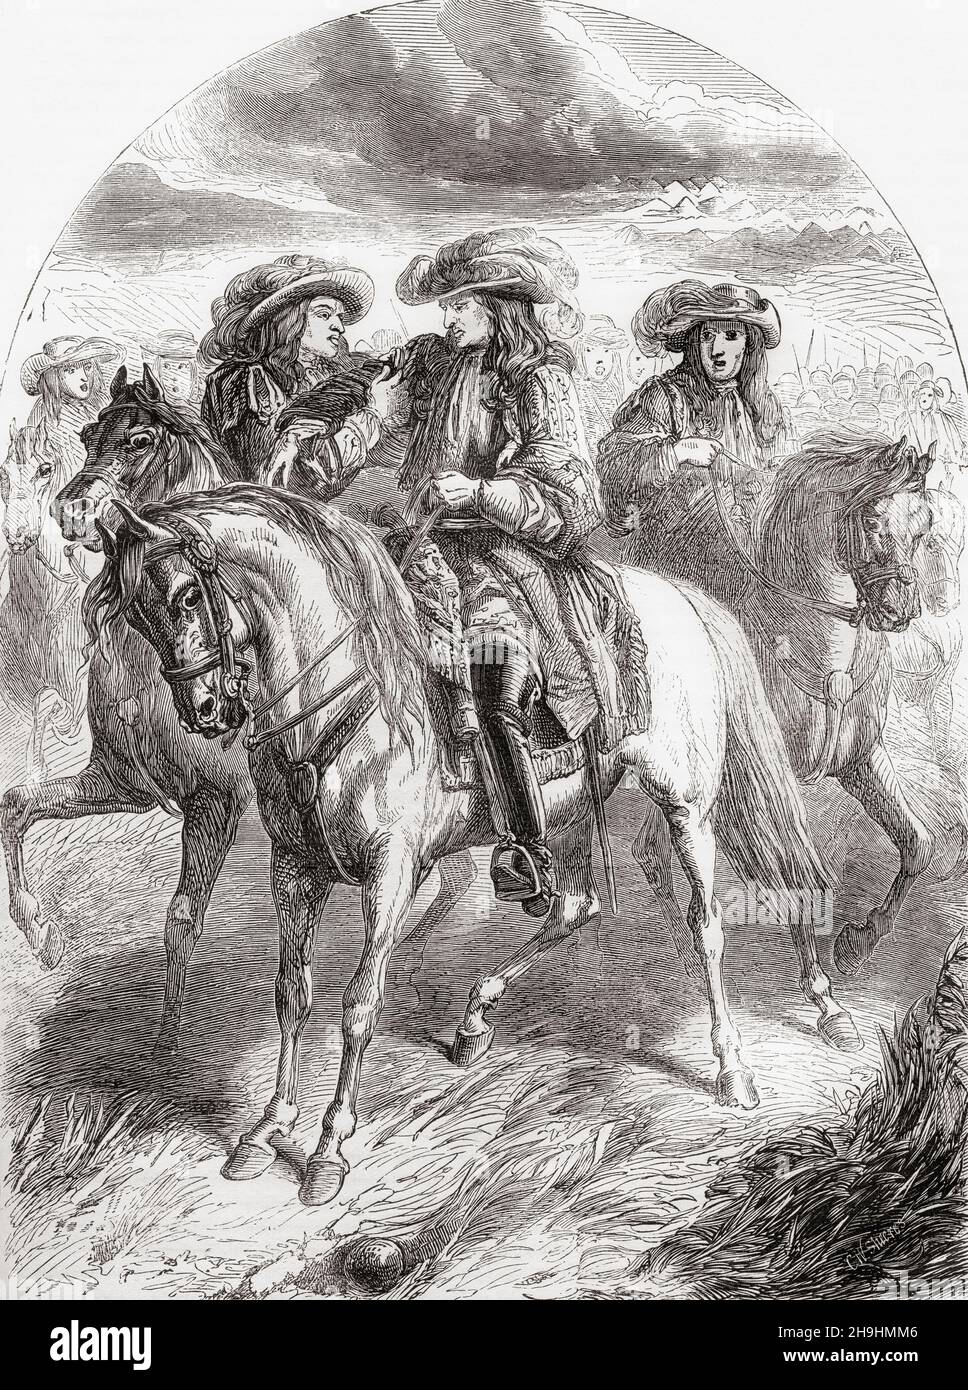 William III wounded at the Battle of the Boyne, 1690.  King William III of England, 1650 -1702, Prince of Orange, Stadtholder of the main Dutch Republic provinces and King of England, Ireland, and Scotland from 1689  - 1702.  From Cassell's Illustrated History of England, published c.1890. Stock Photo